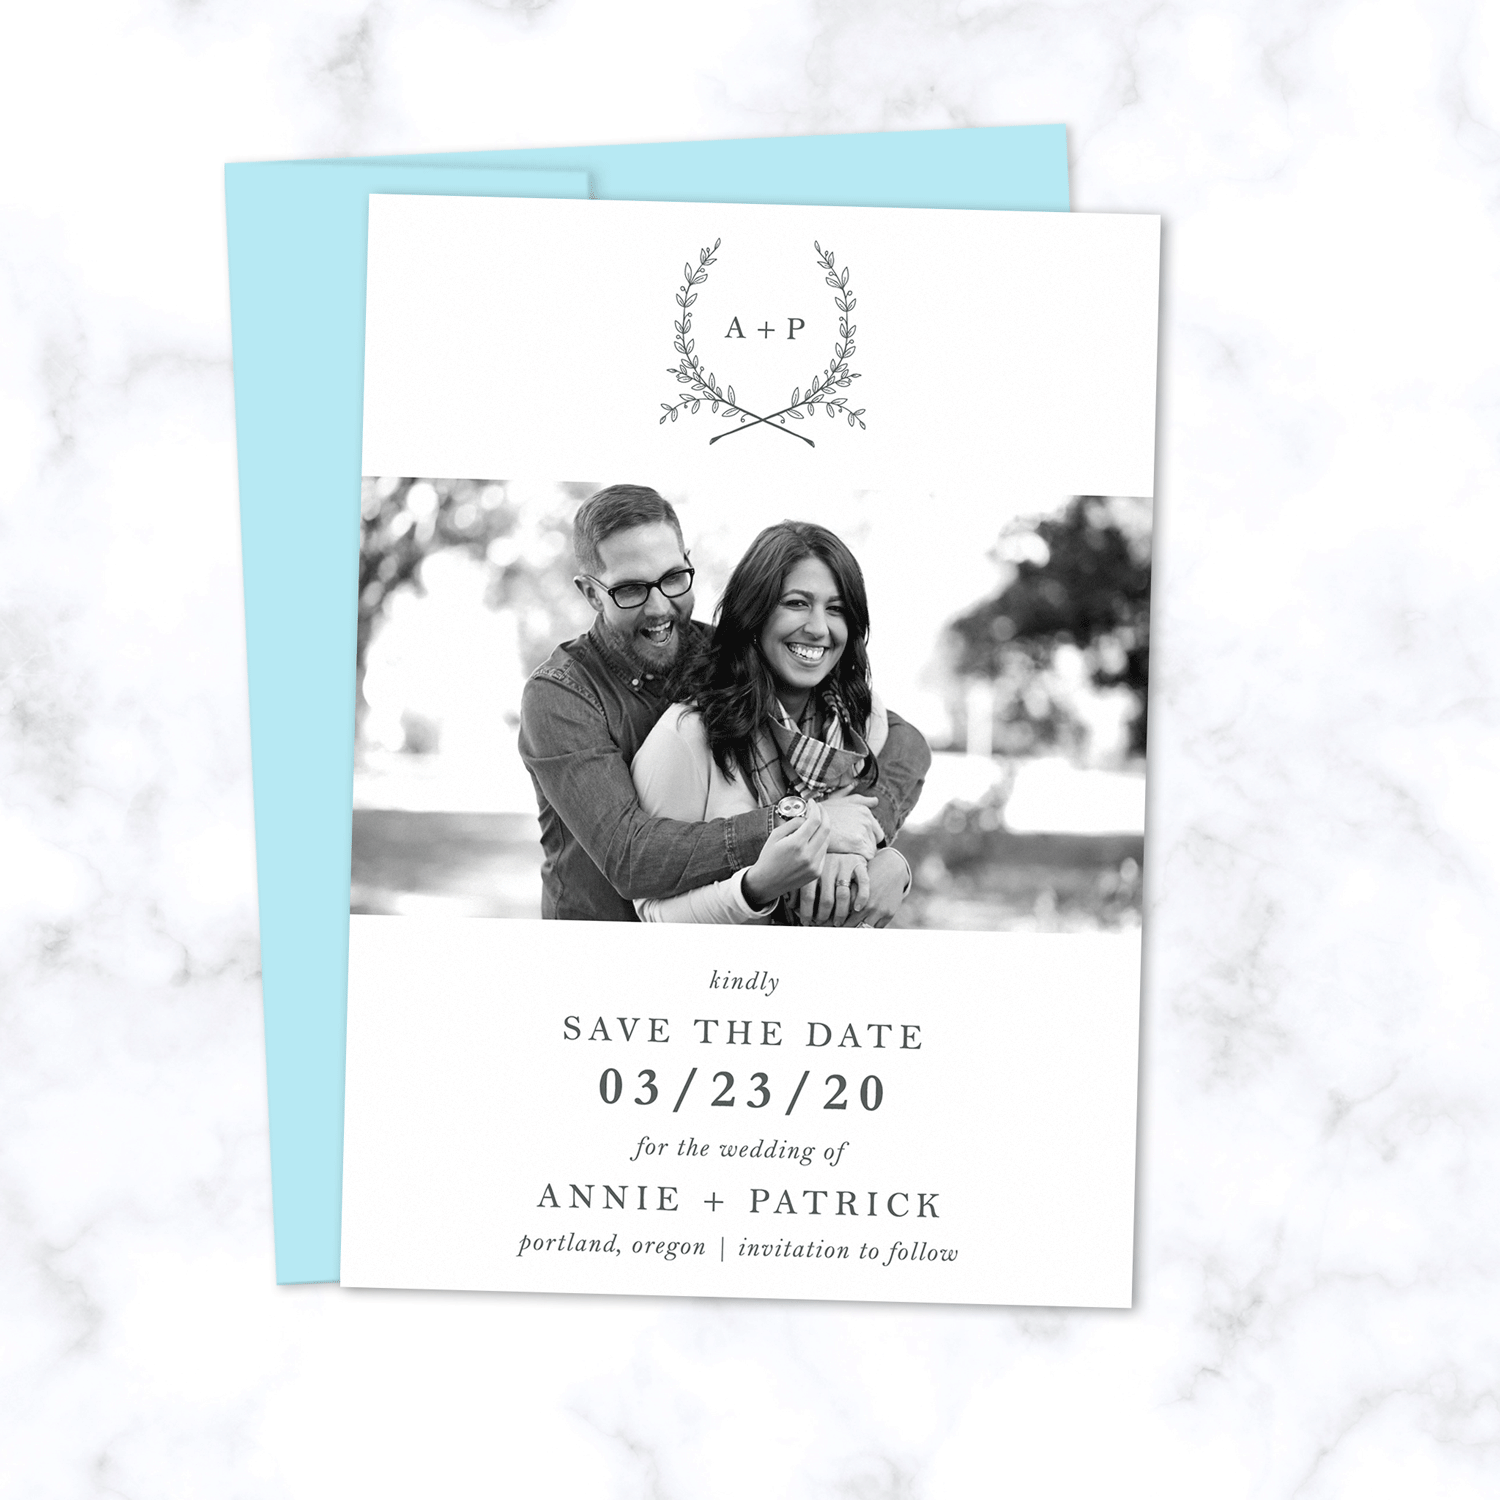 Save the Date Photo Card with Initials and Hand Drawn Floral Wreath - The Ophelia Suite Wedding Collection - Front with Light Blue Envelope